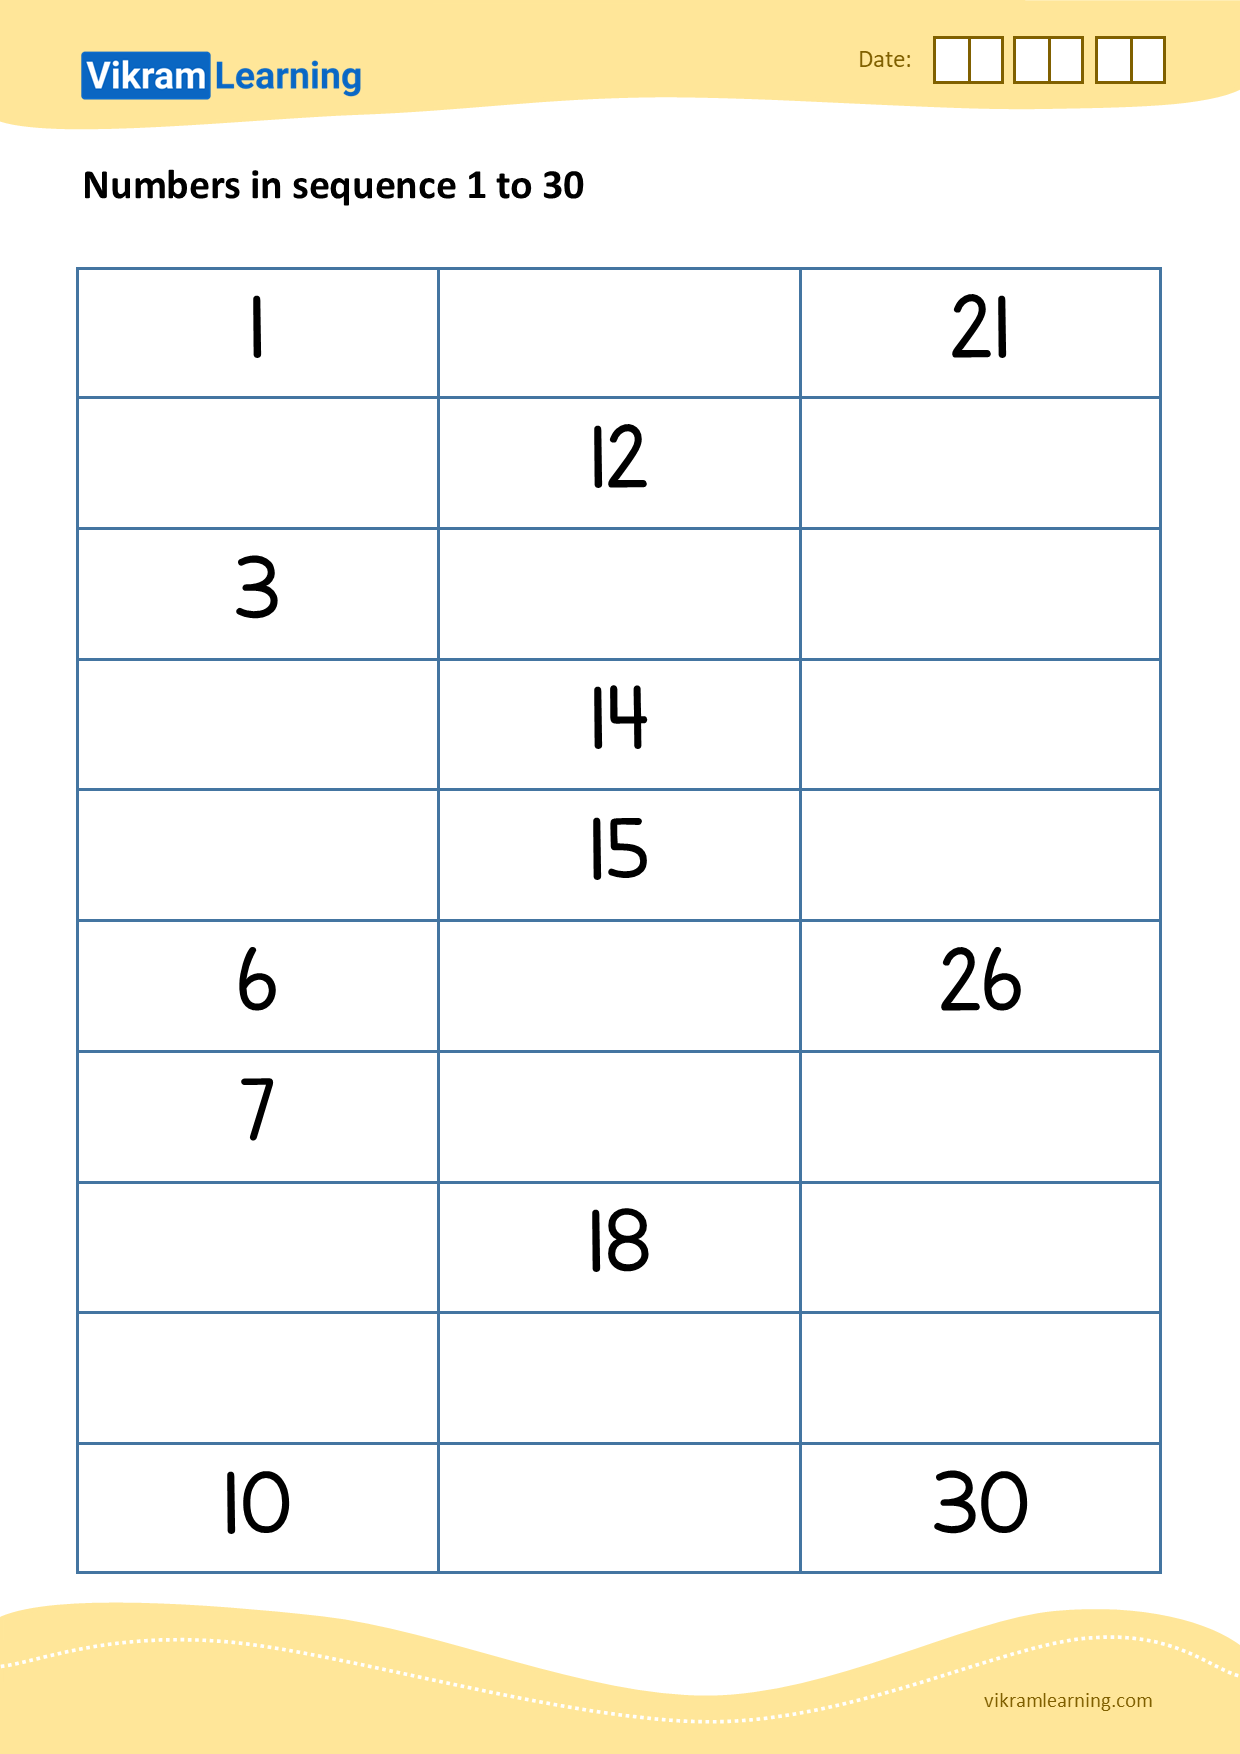 Download 02 - numbers in sequence 1 to 30 worksheets